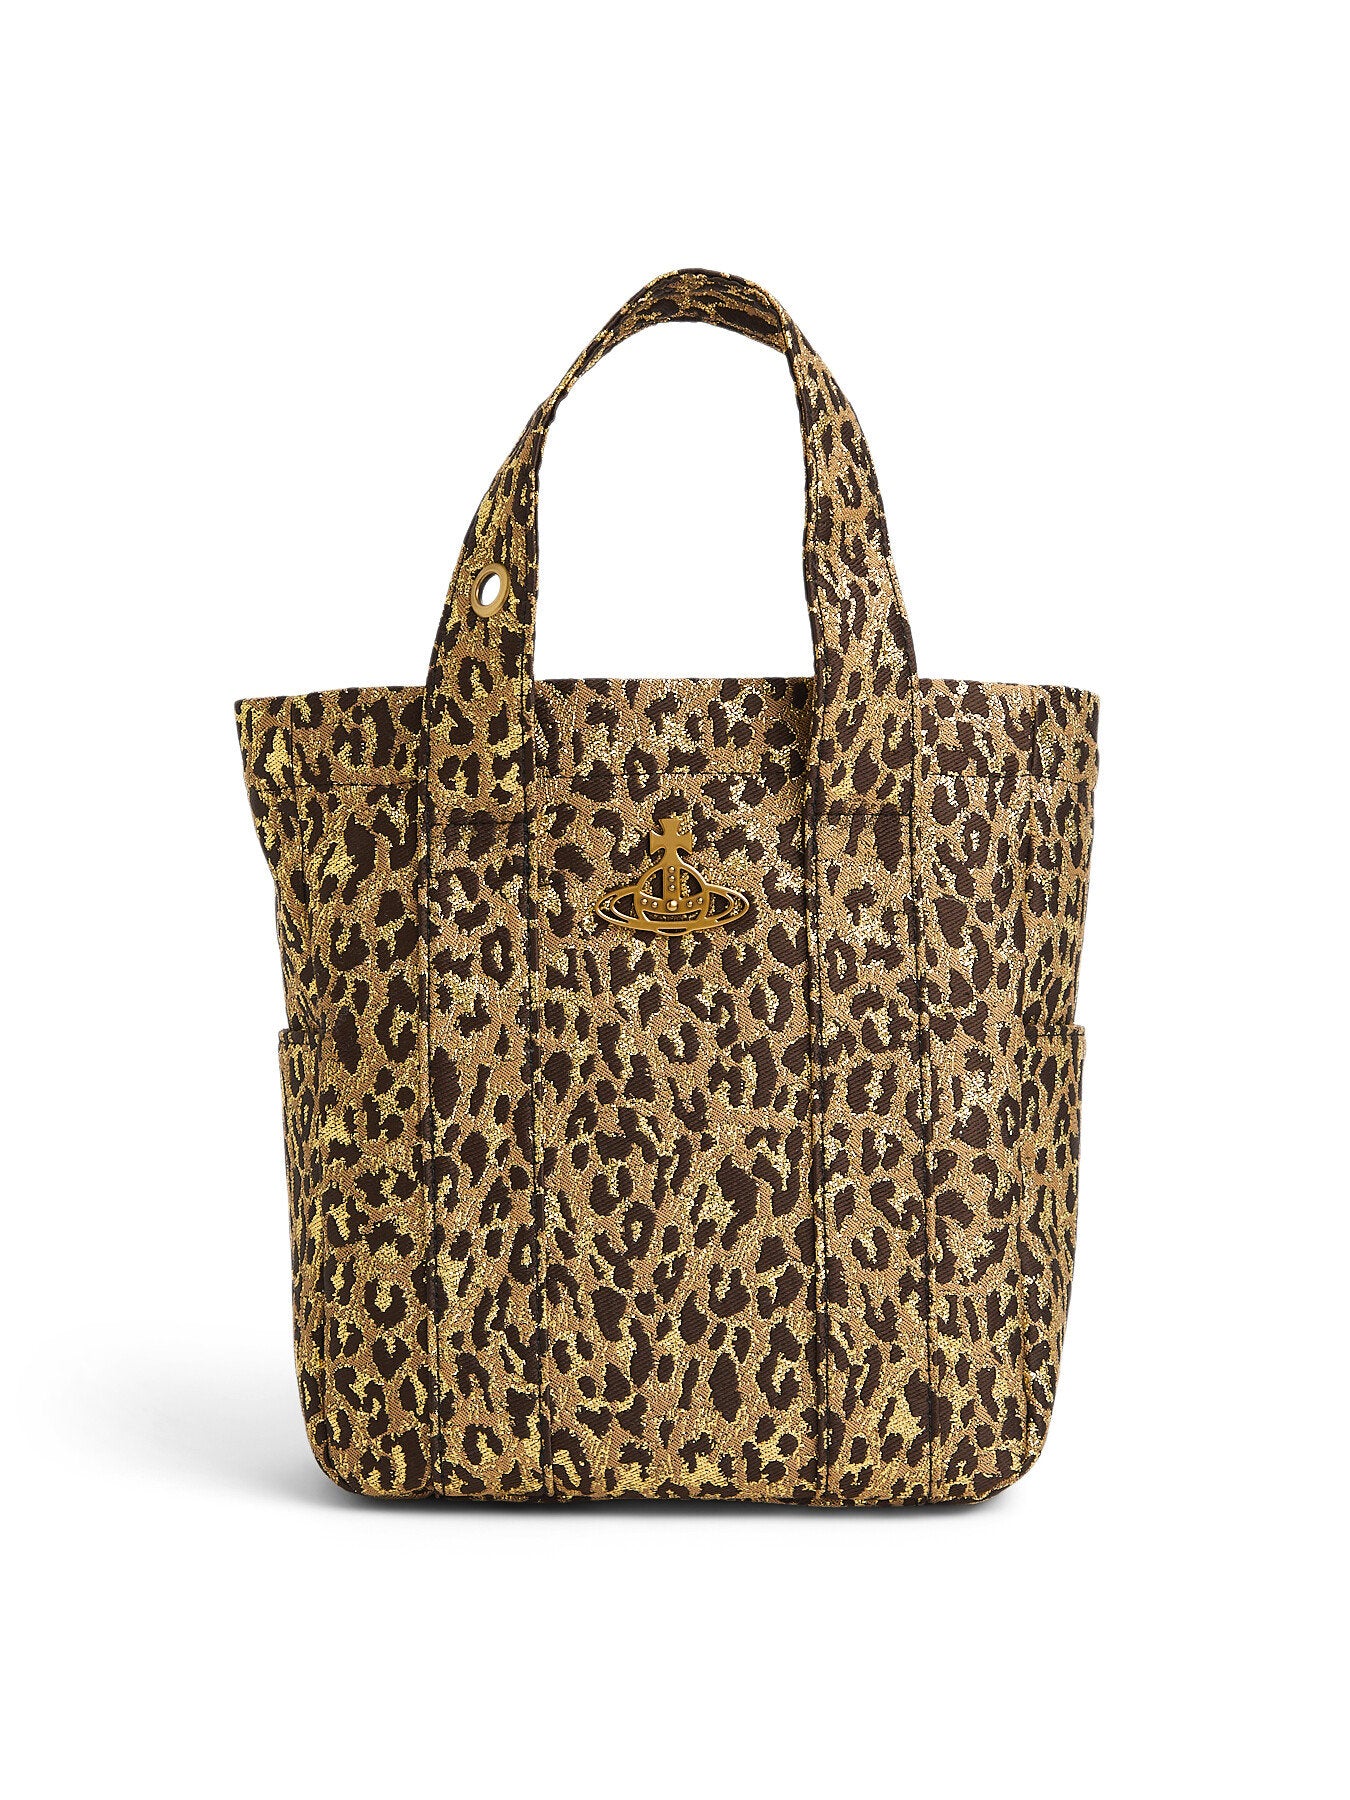 Vivienne Westwood Leopard Murray Small Tote Bag